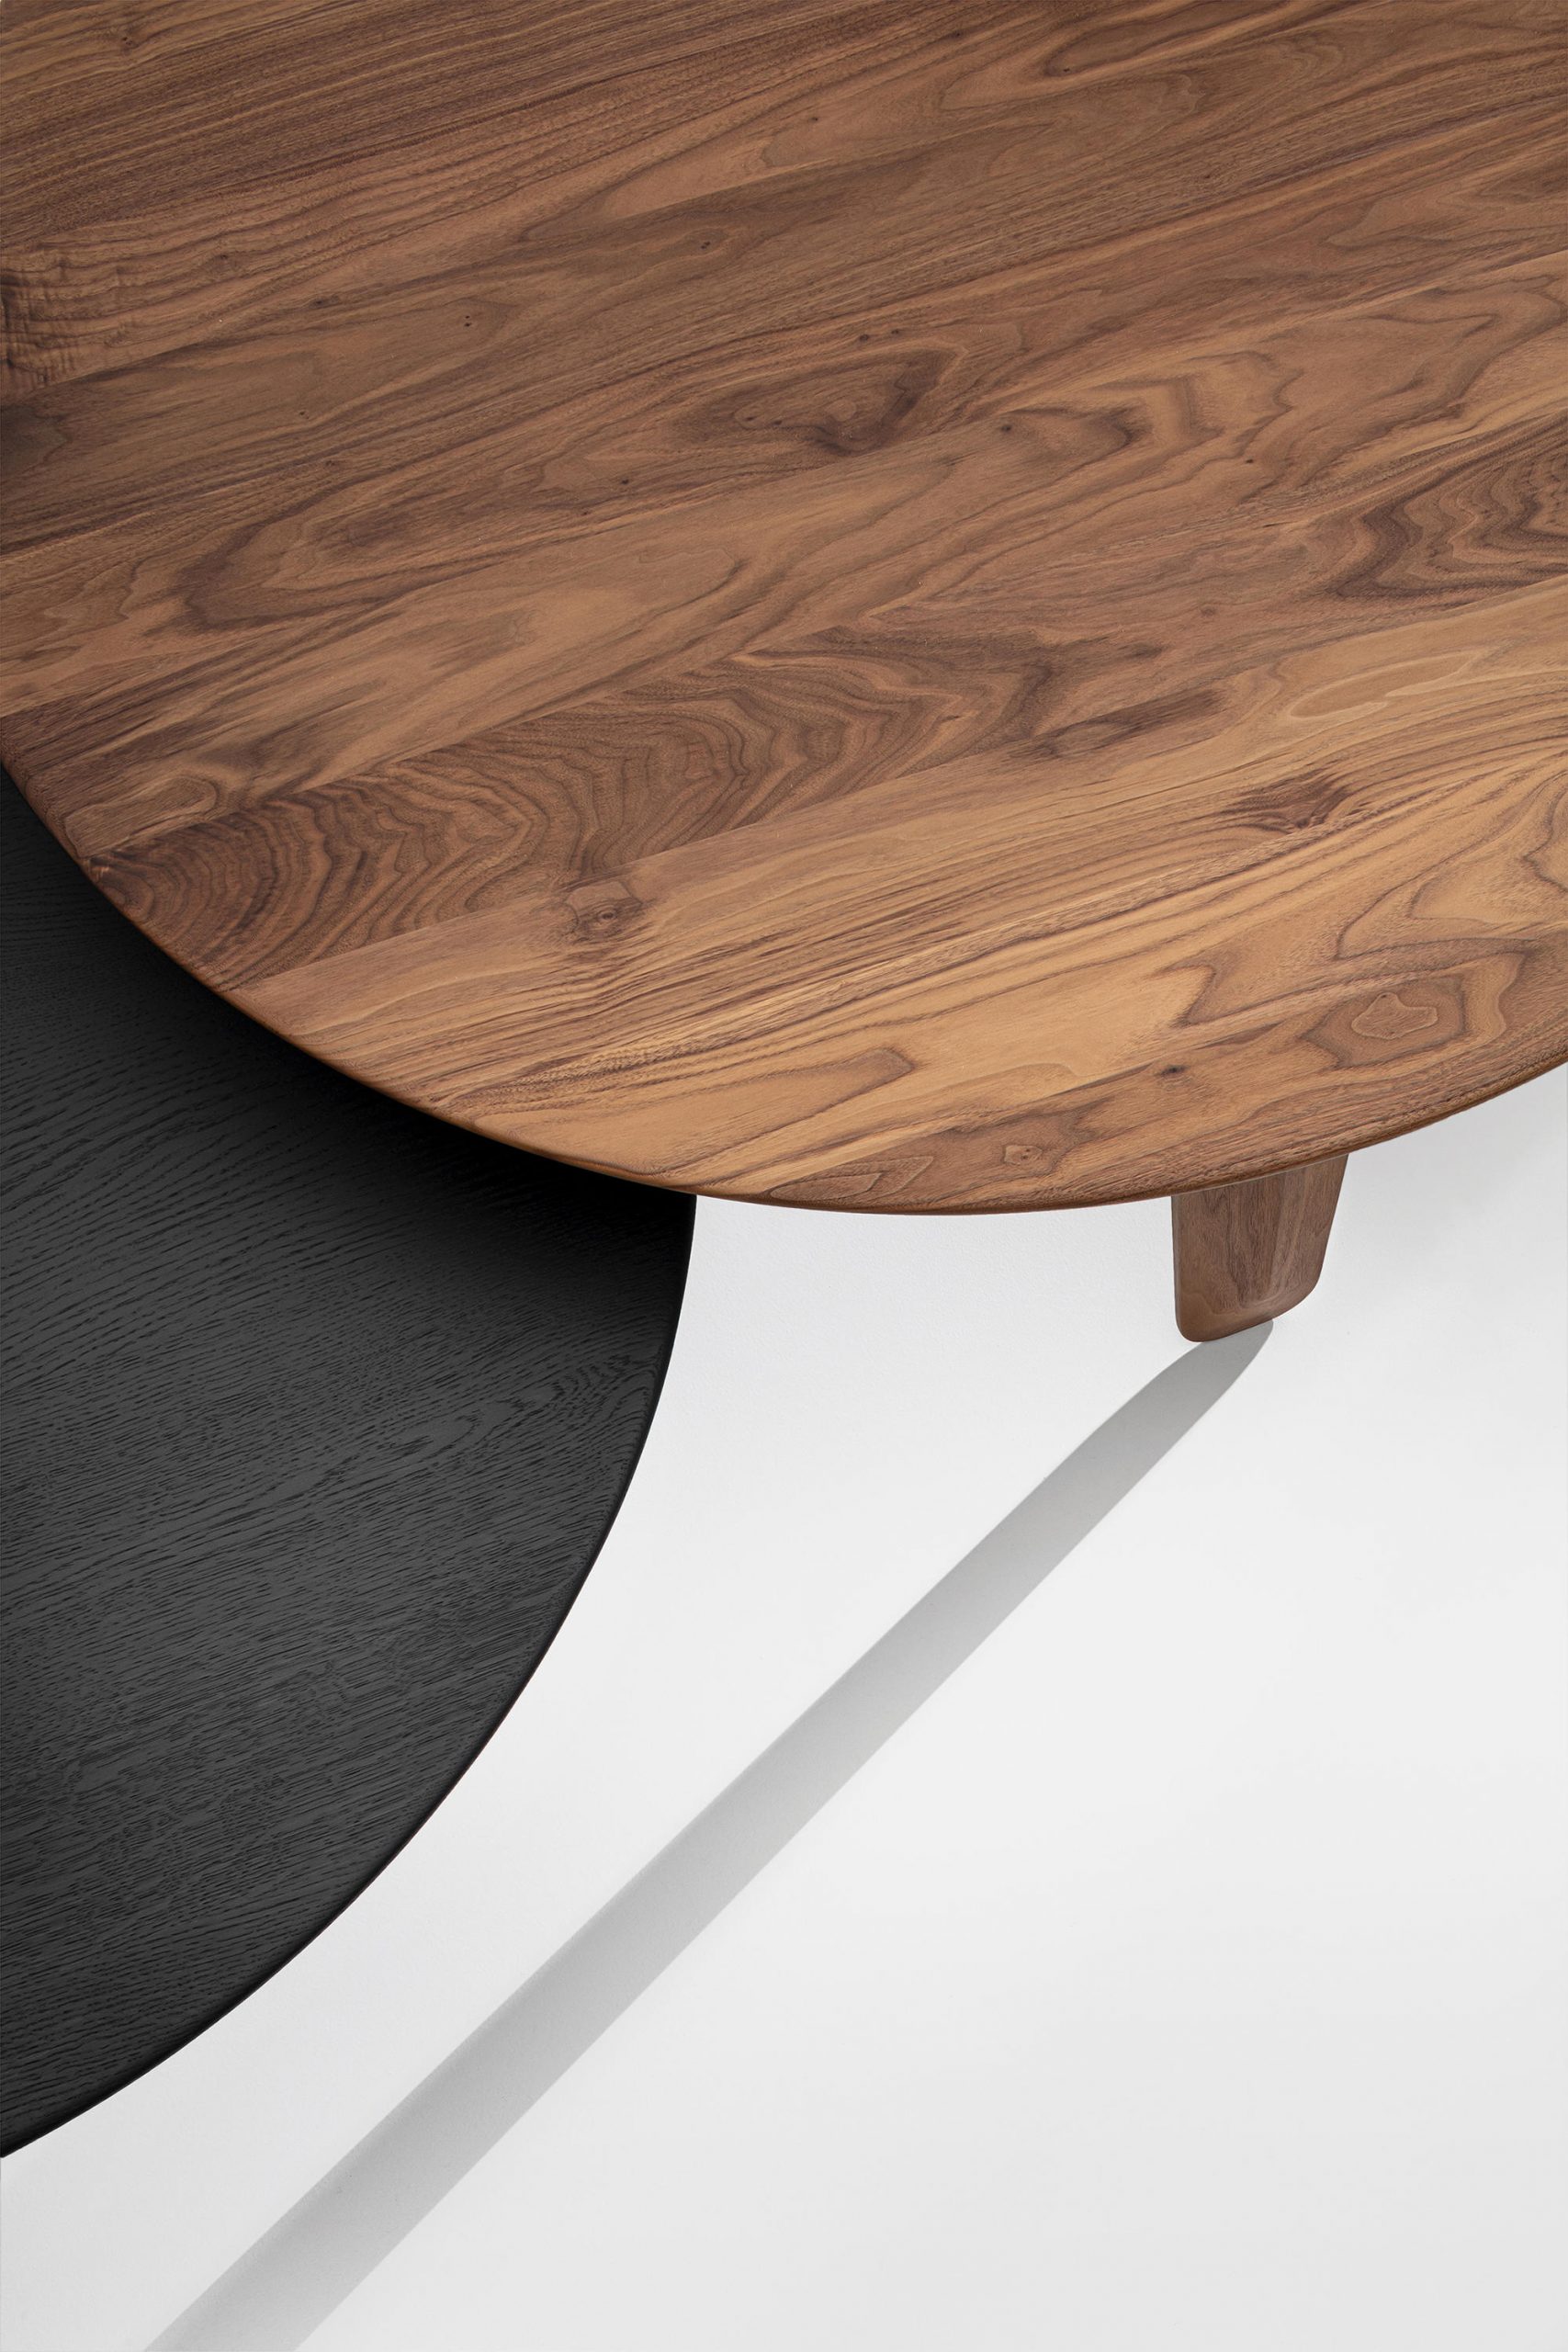 Kuyu Coffee Table by Formstelle for Zeitraum